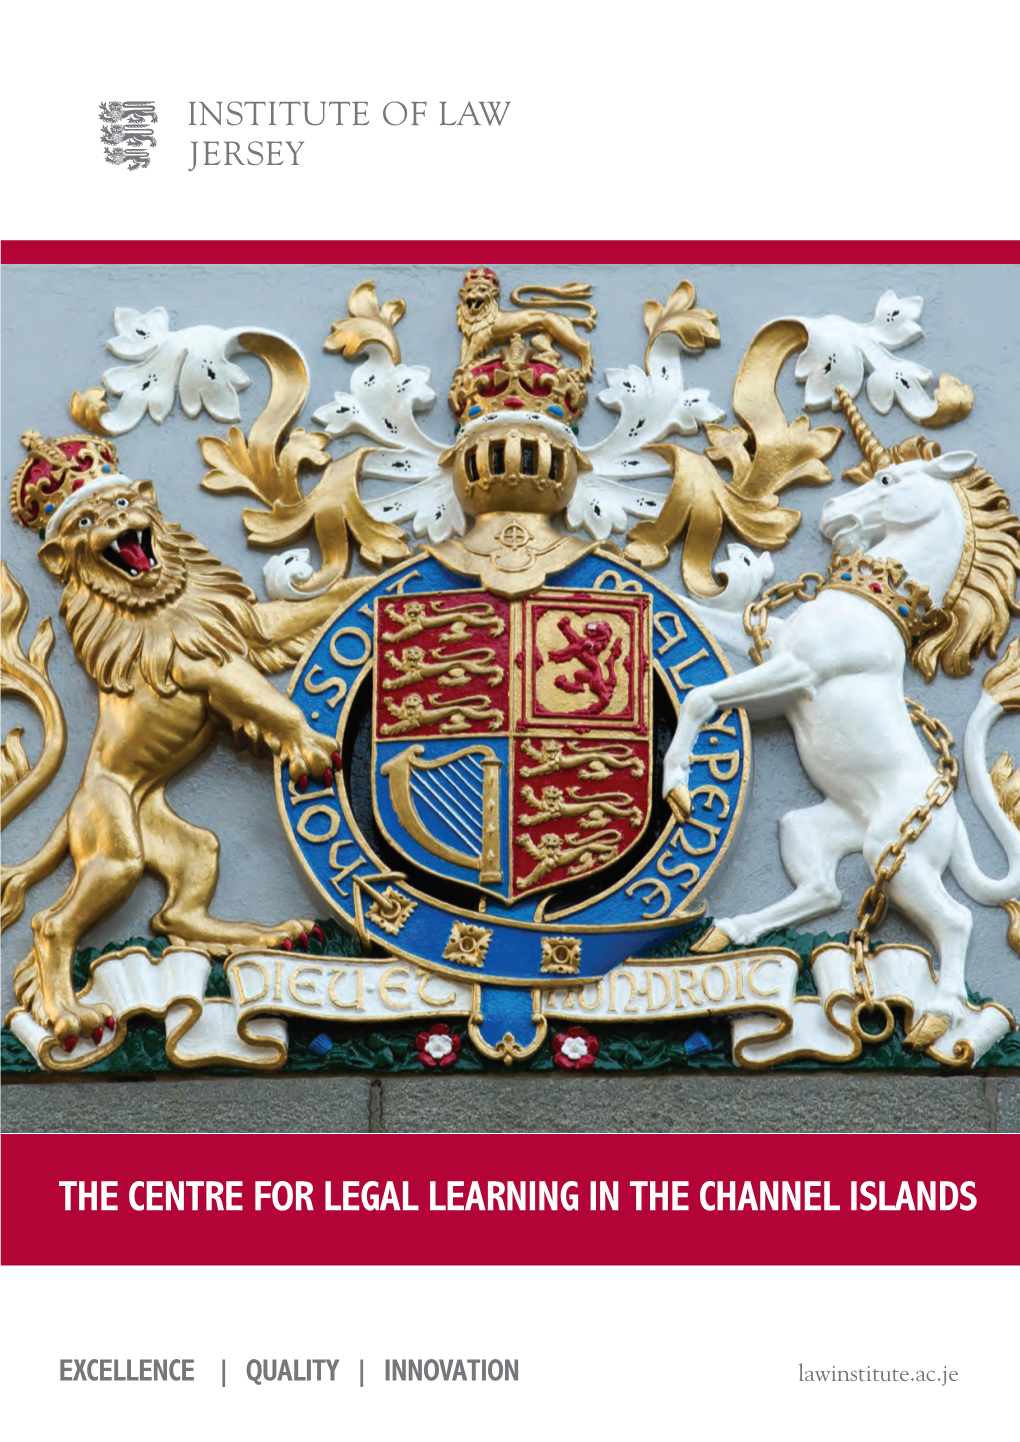 The Centre for Legal Learning in the Channel Islands